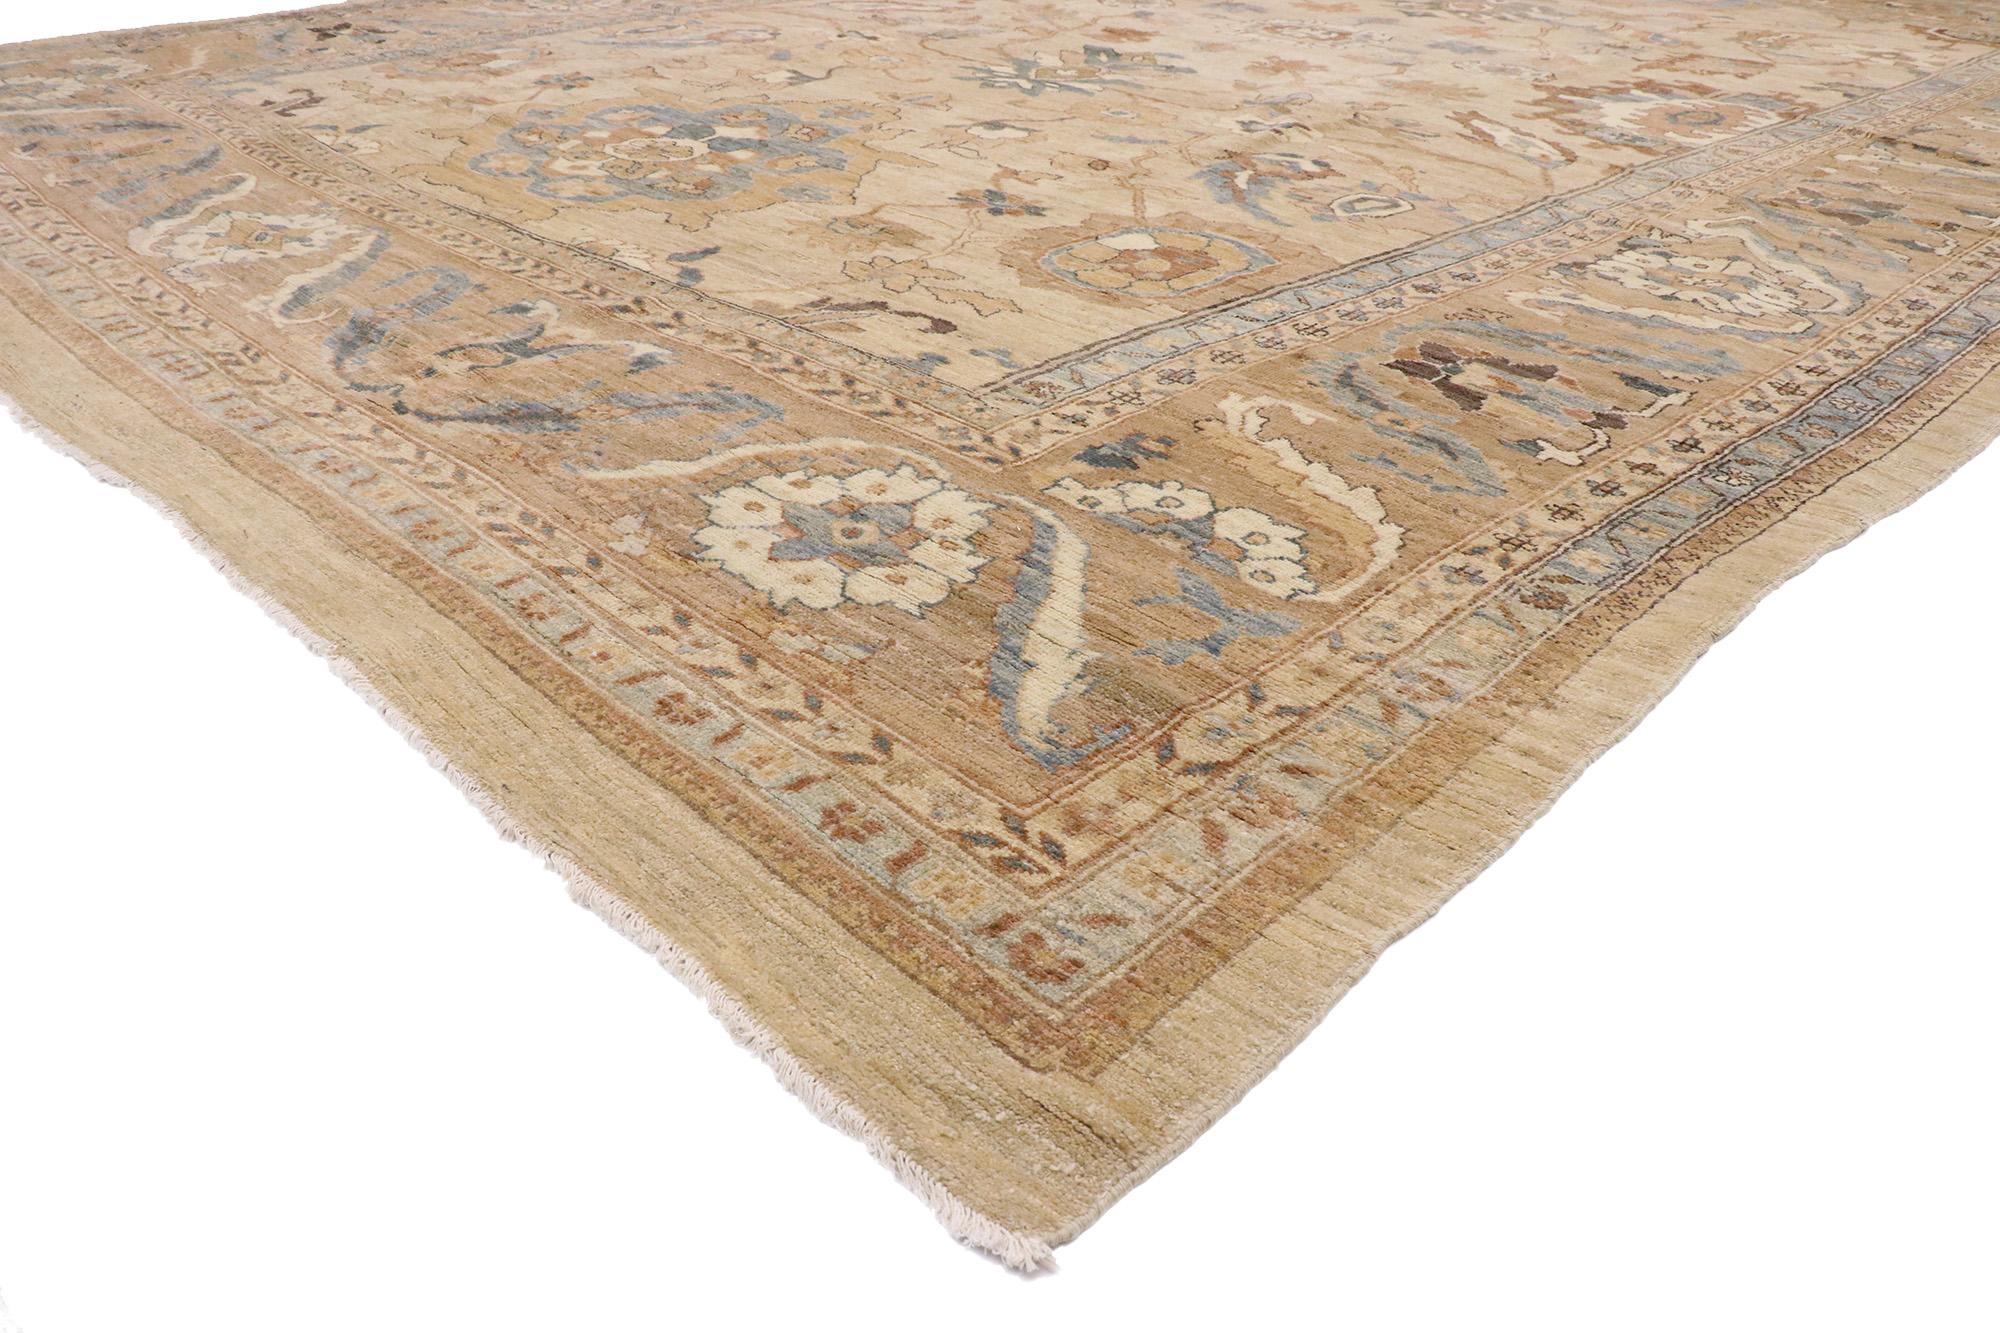 76553 Light Brown Organic Modern Persian Sultanabad Rug, 13'00 x 18'00. Incorporating Biophilic Design principles and warm coastal style, this hand-knotted wool contemporary Persian Sultanabad rug effortlessly embodies transitional elegance. Its